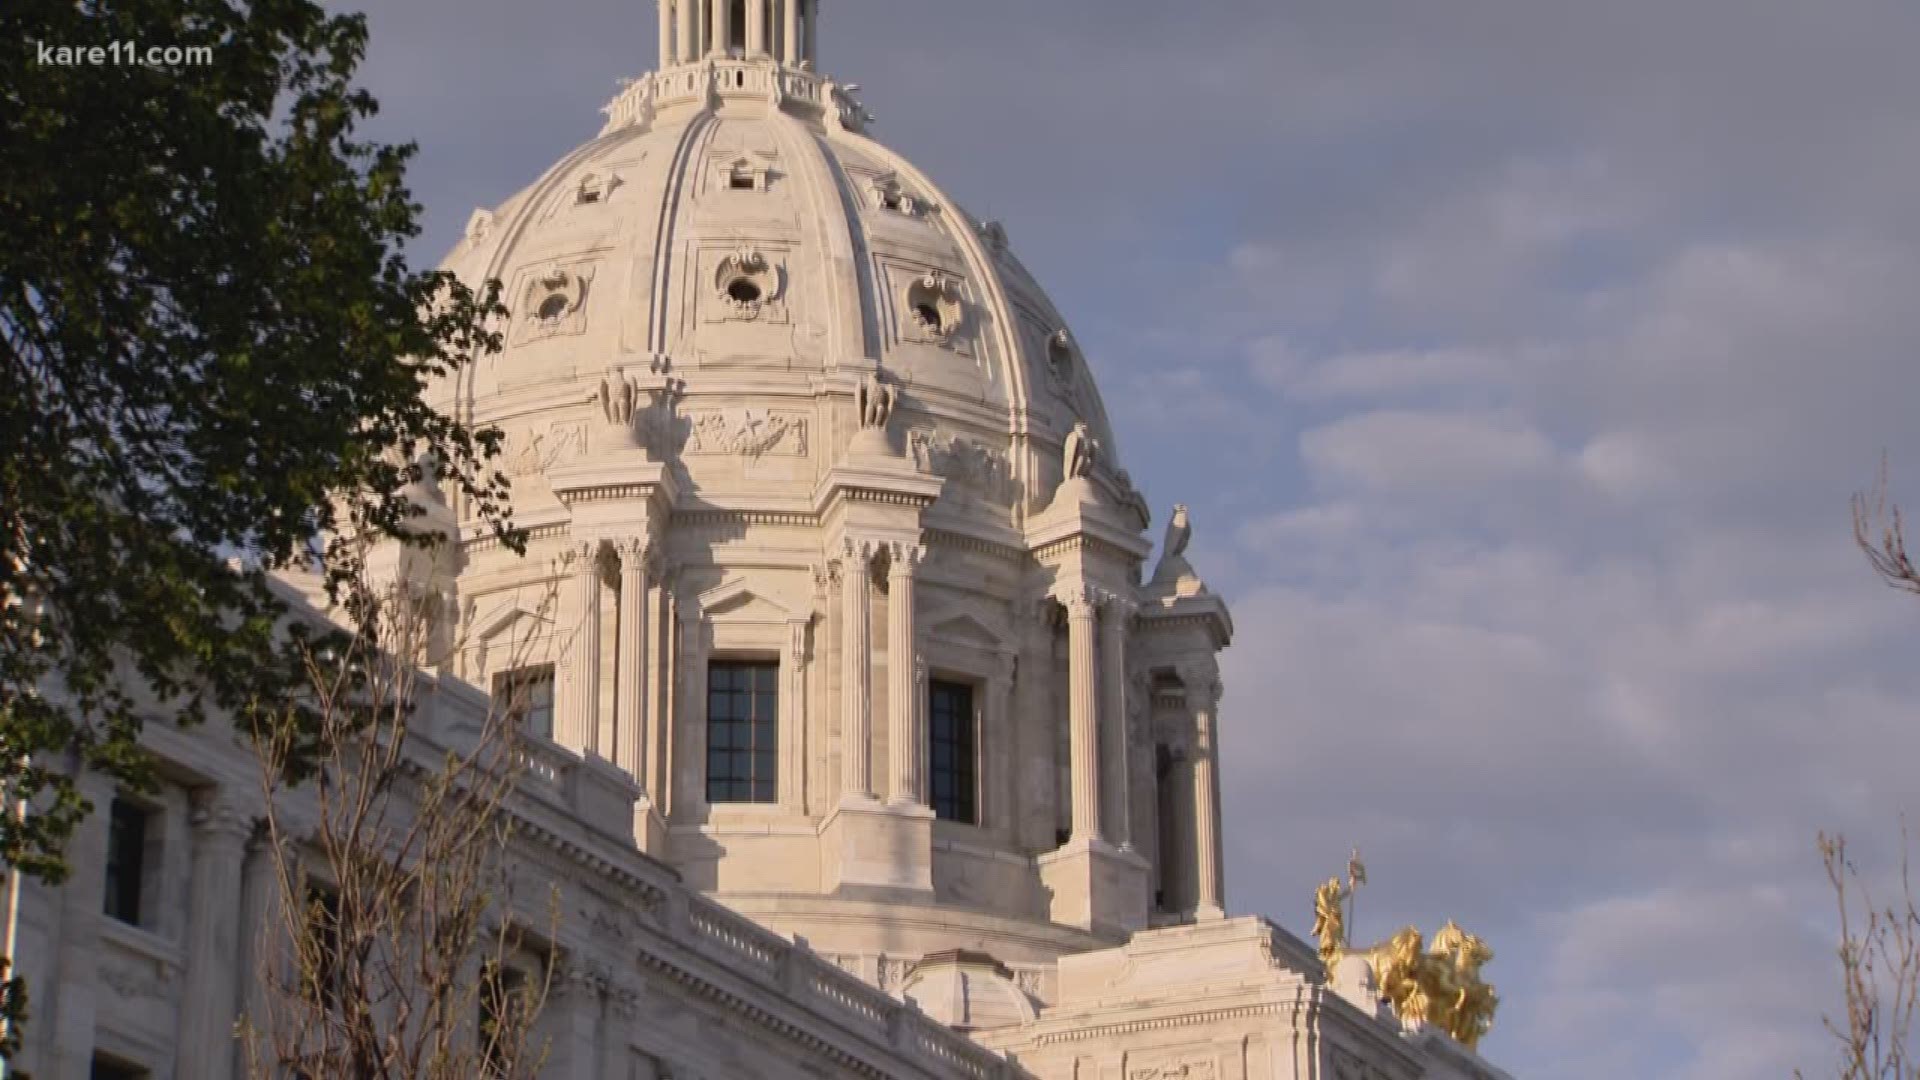 Gov. Walz and legislative leaders resumed budget negotiations at 7 p.m. Sunday after putting them on hold last week.